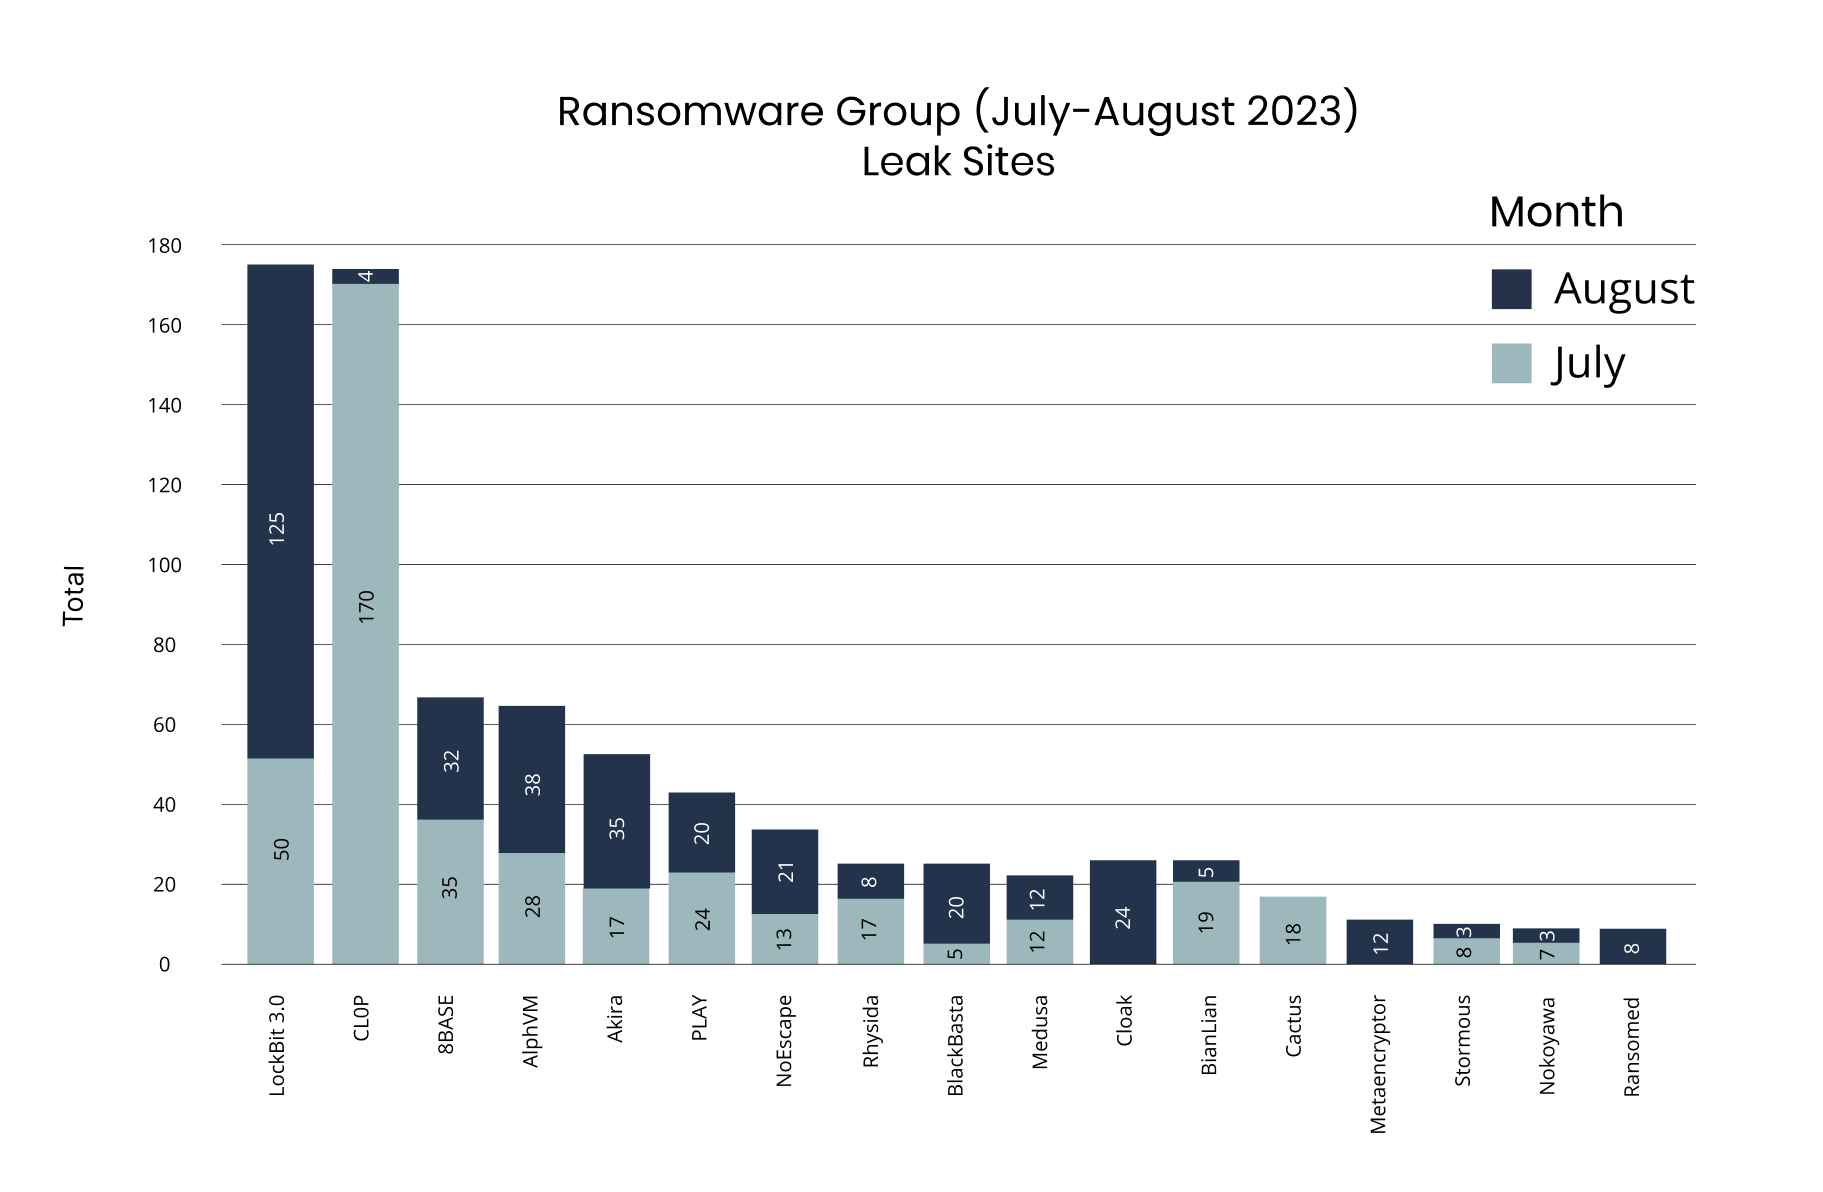 [BAR GRAPH] Ransomware Group Leak Sites July - Aug. 2023